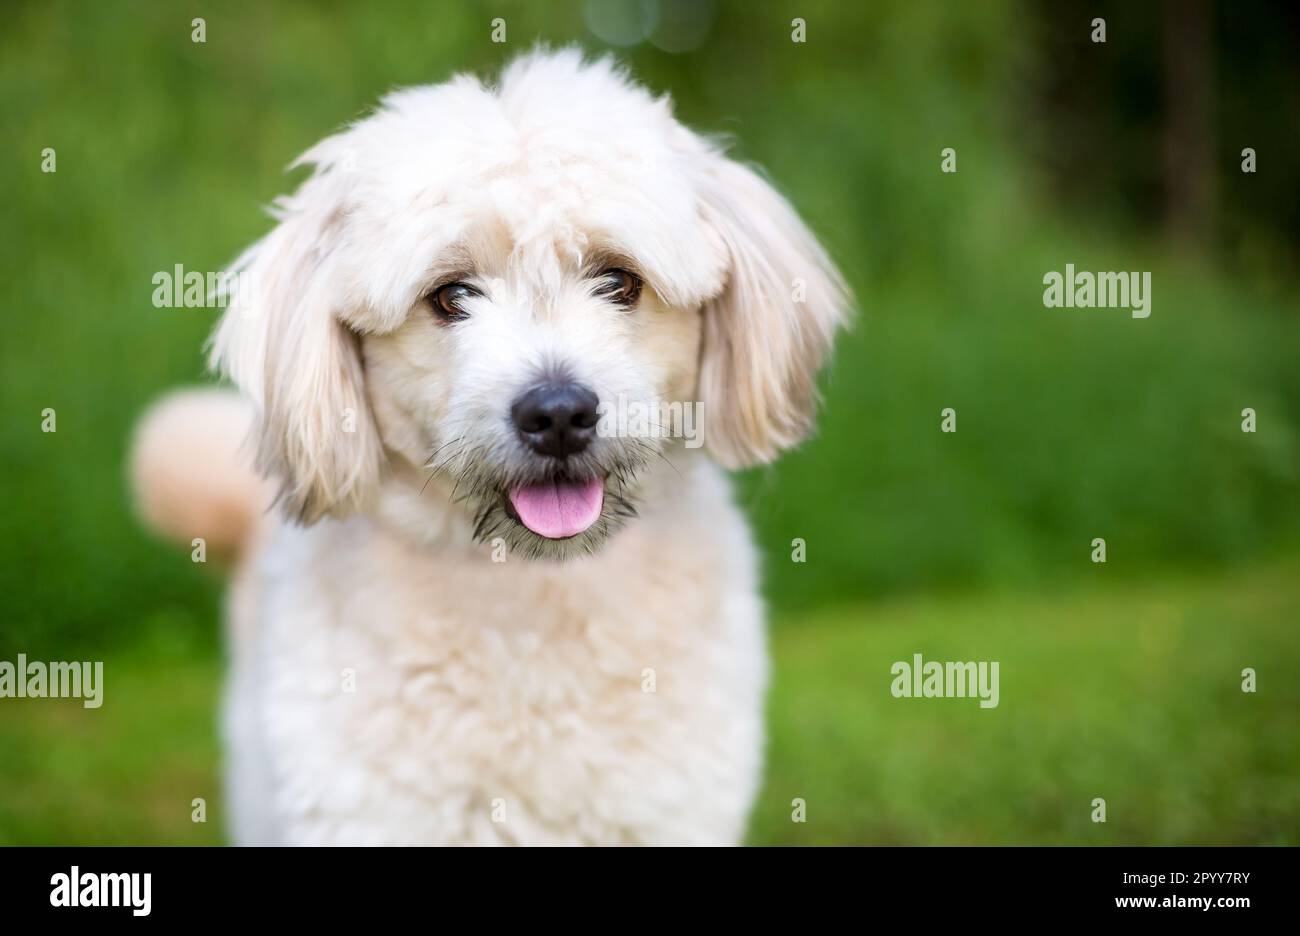 A cute Pomeranian x Poodle mixed breed dog looking at the camera Stock Photo